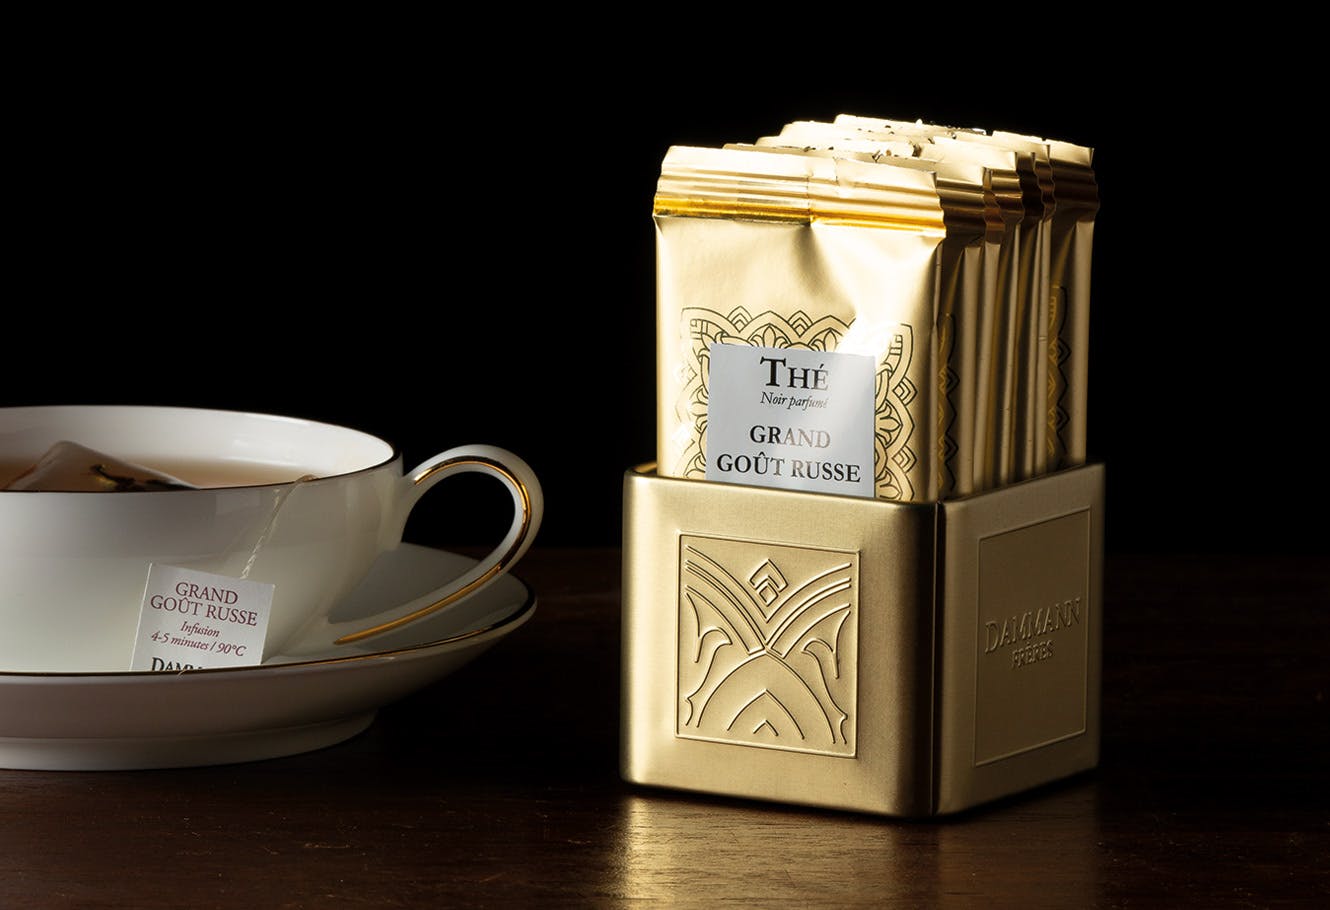 Cup of tea "Grand Goût Russe" and tea bag tray, golden finish metal.